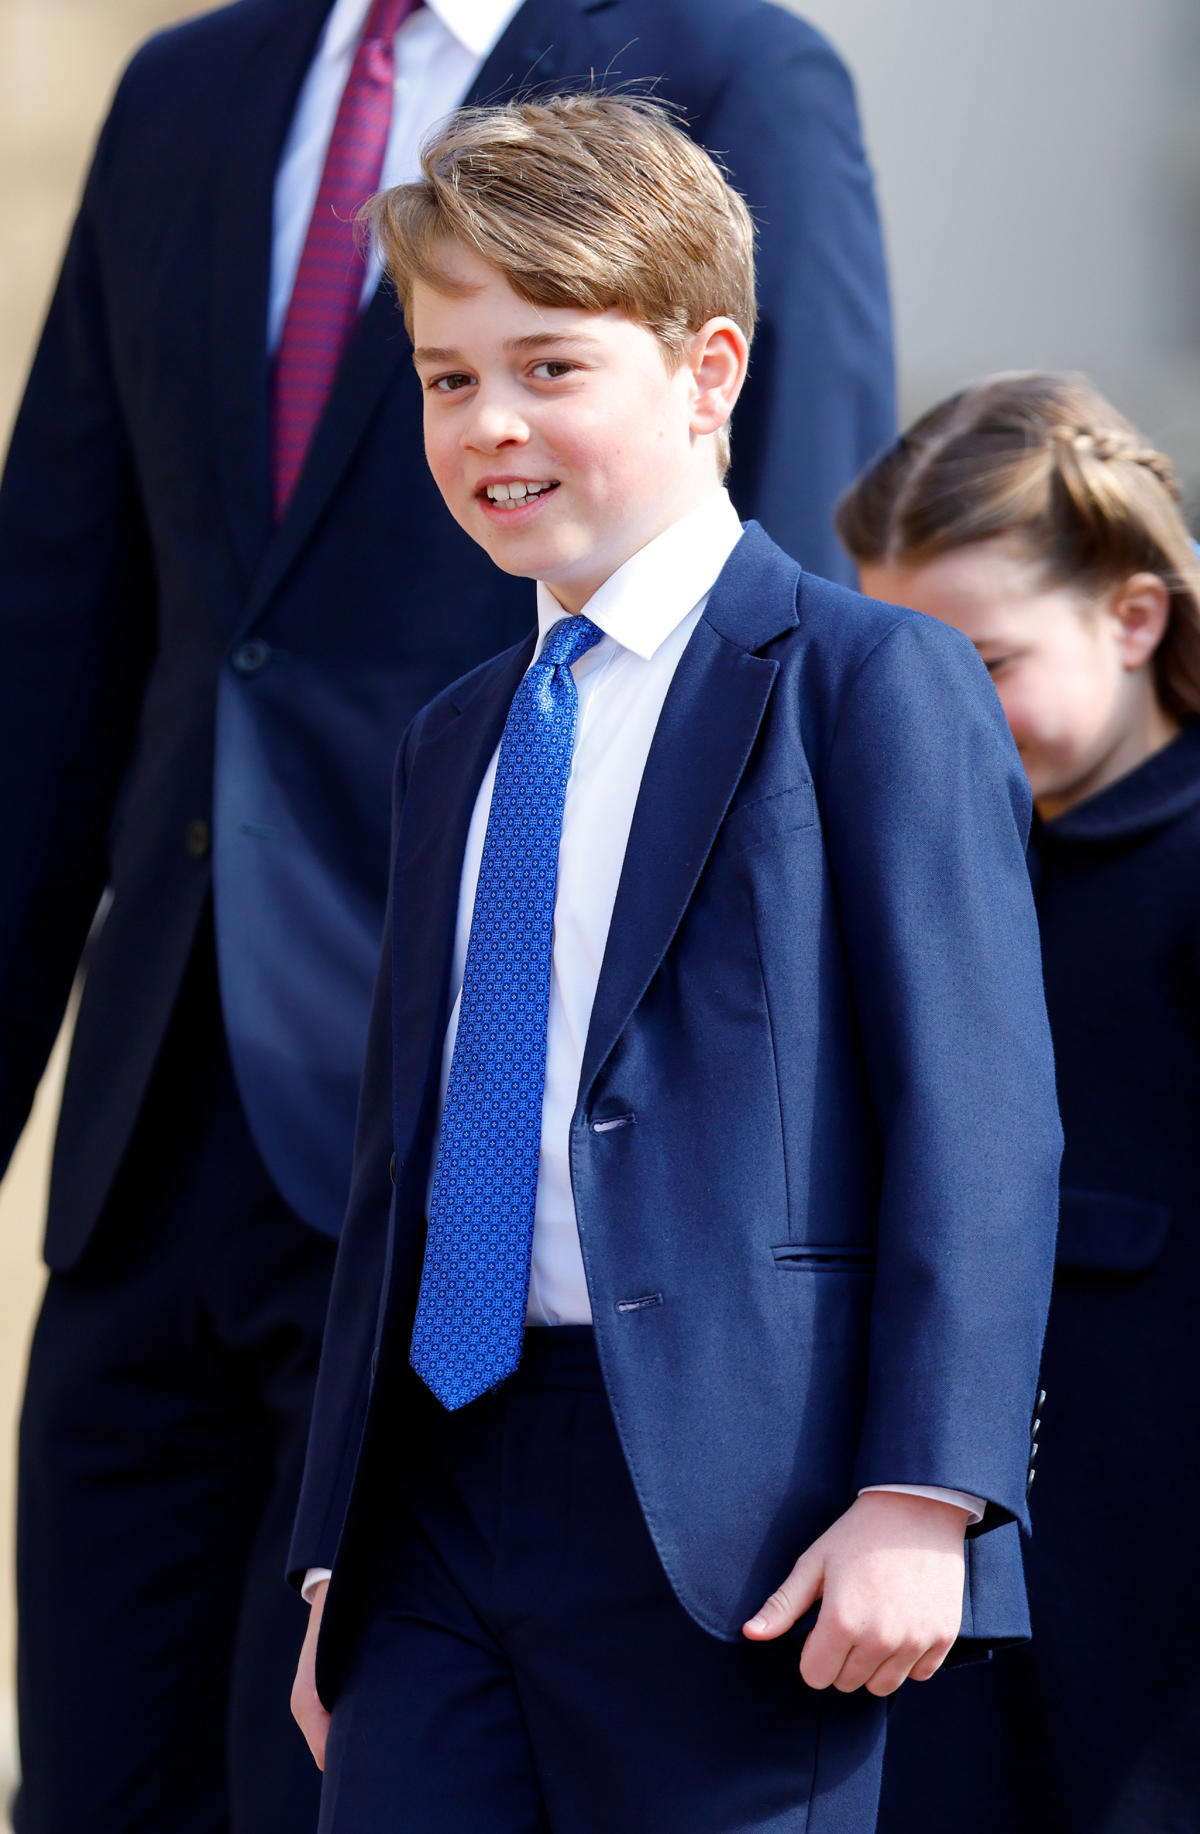 Who are King Charles' pages of honor? Prince George is among the 8 boys ...